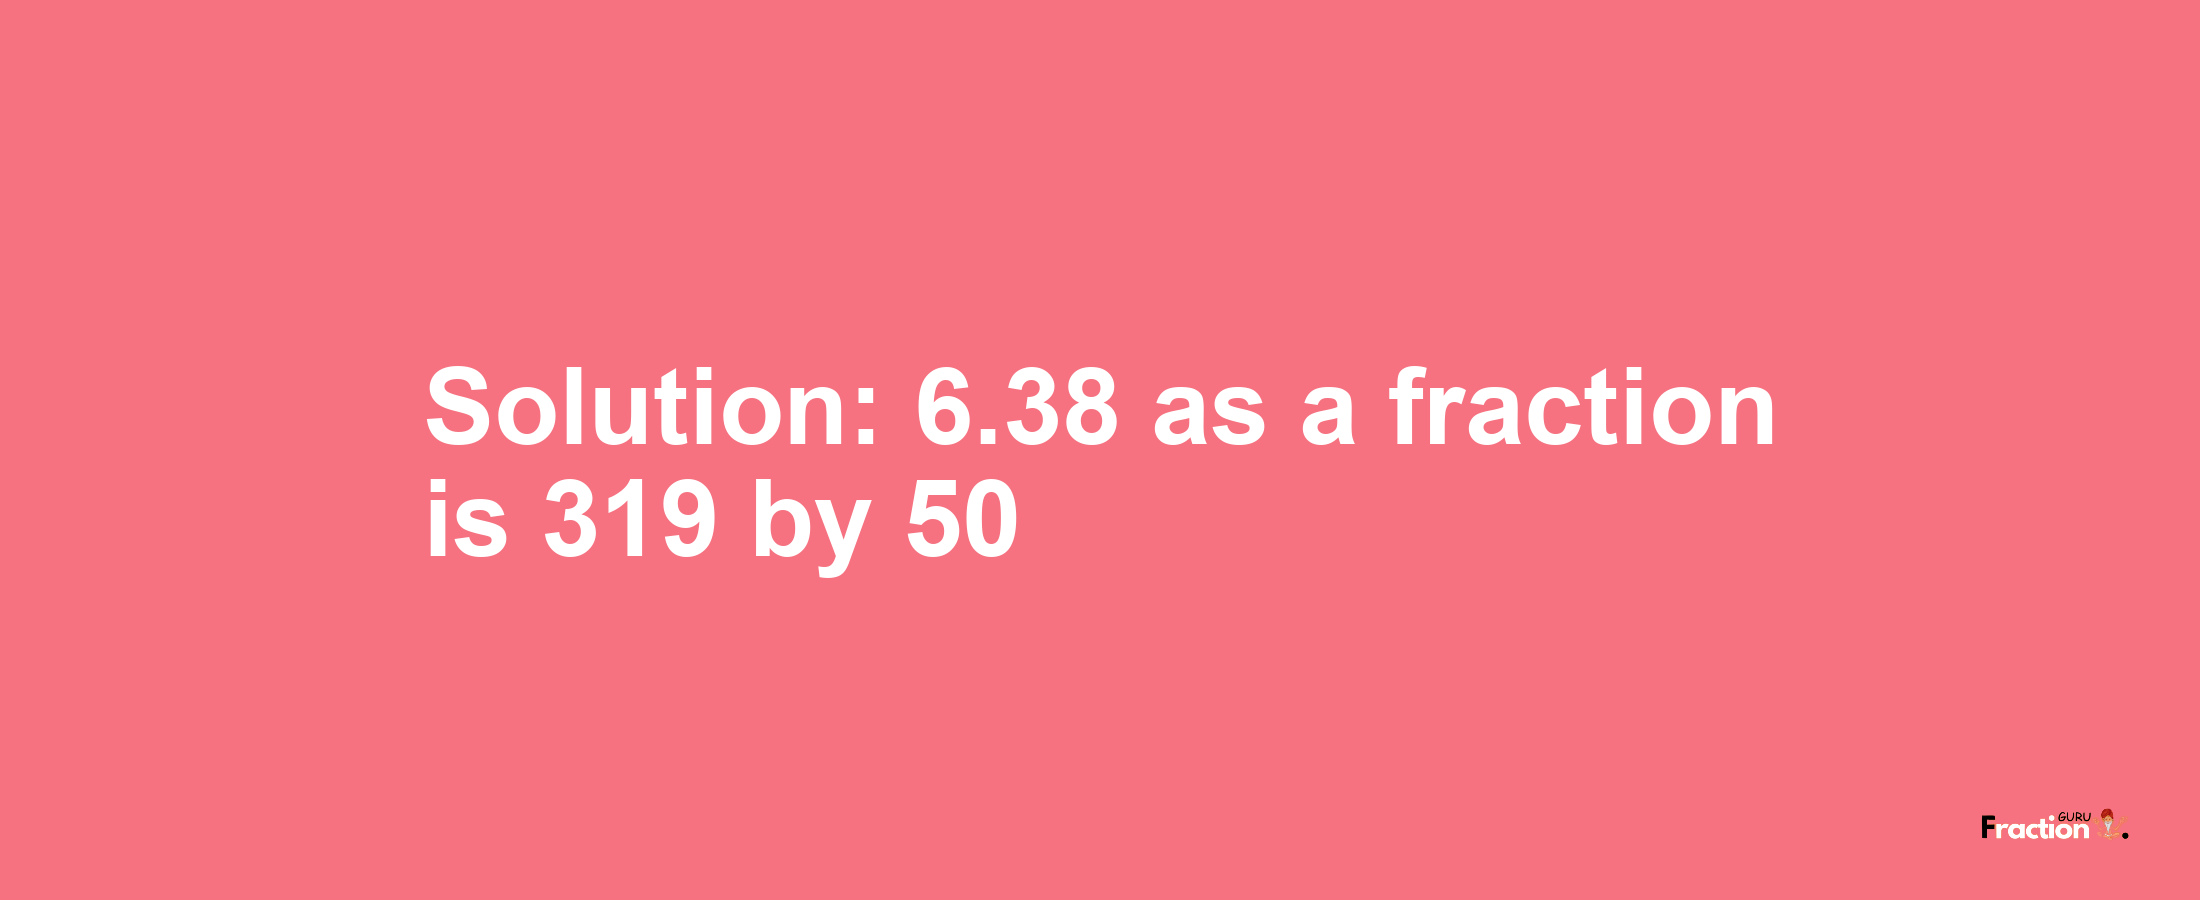 Solution:6.38 as a fraction is 319/50